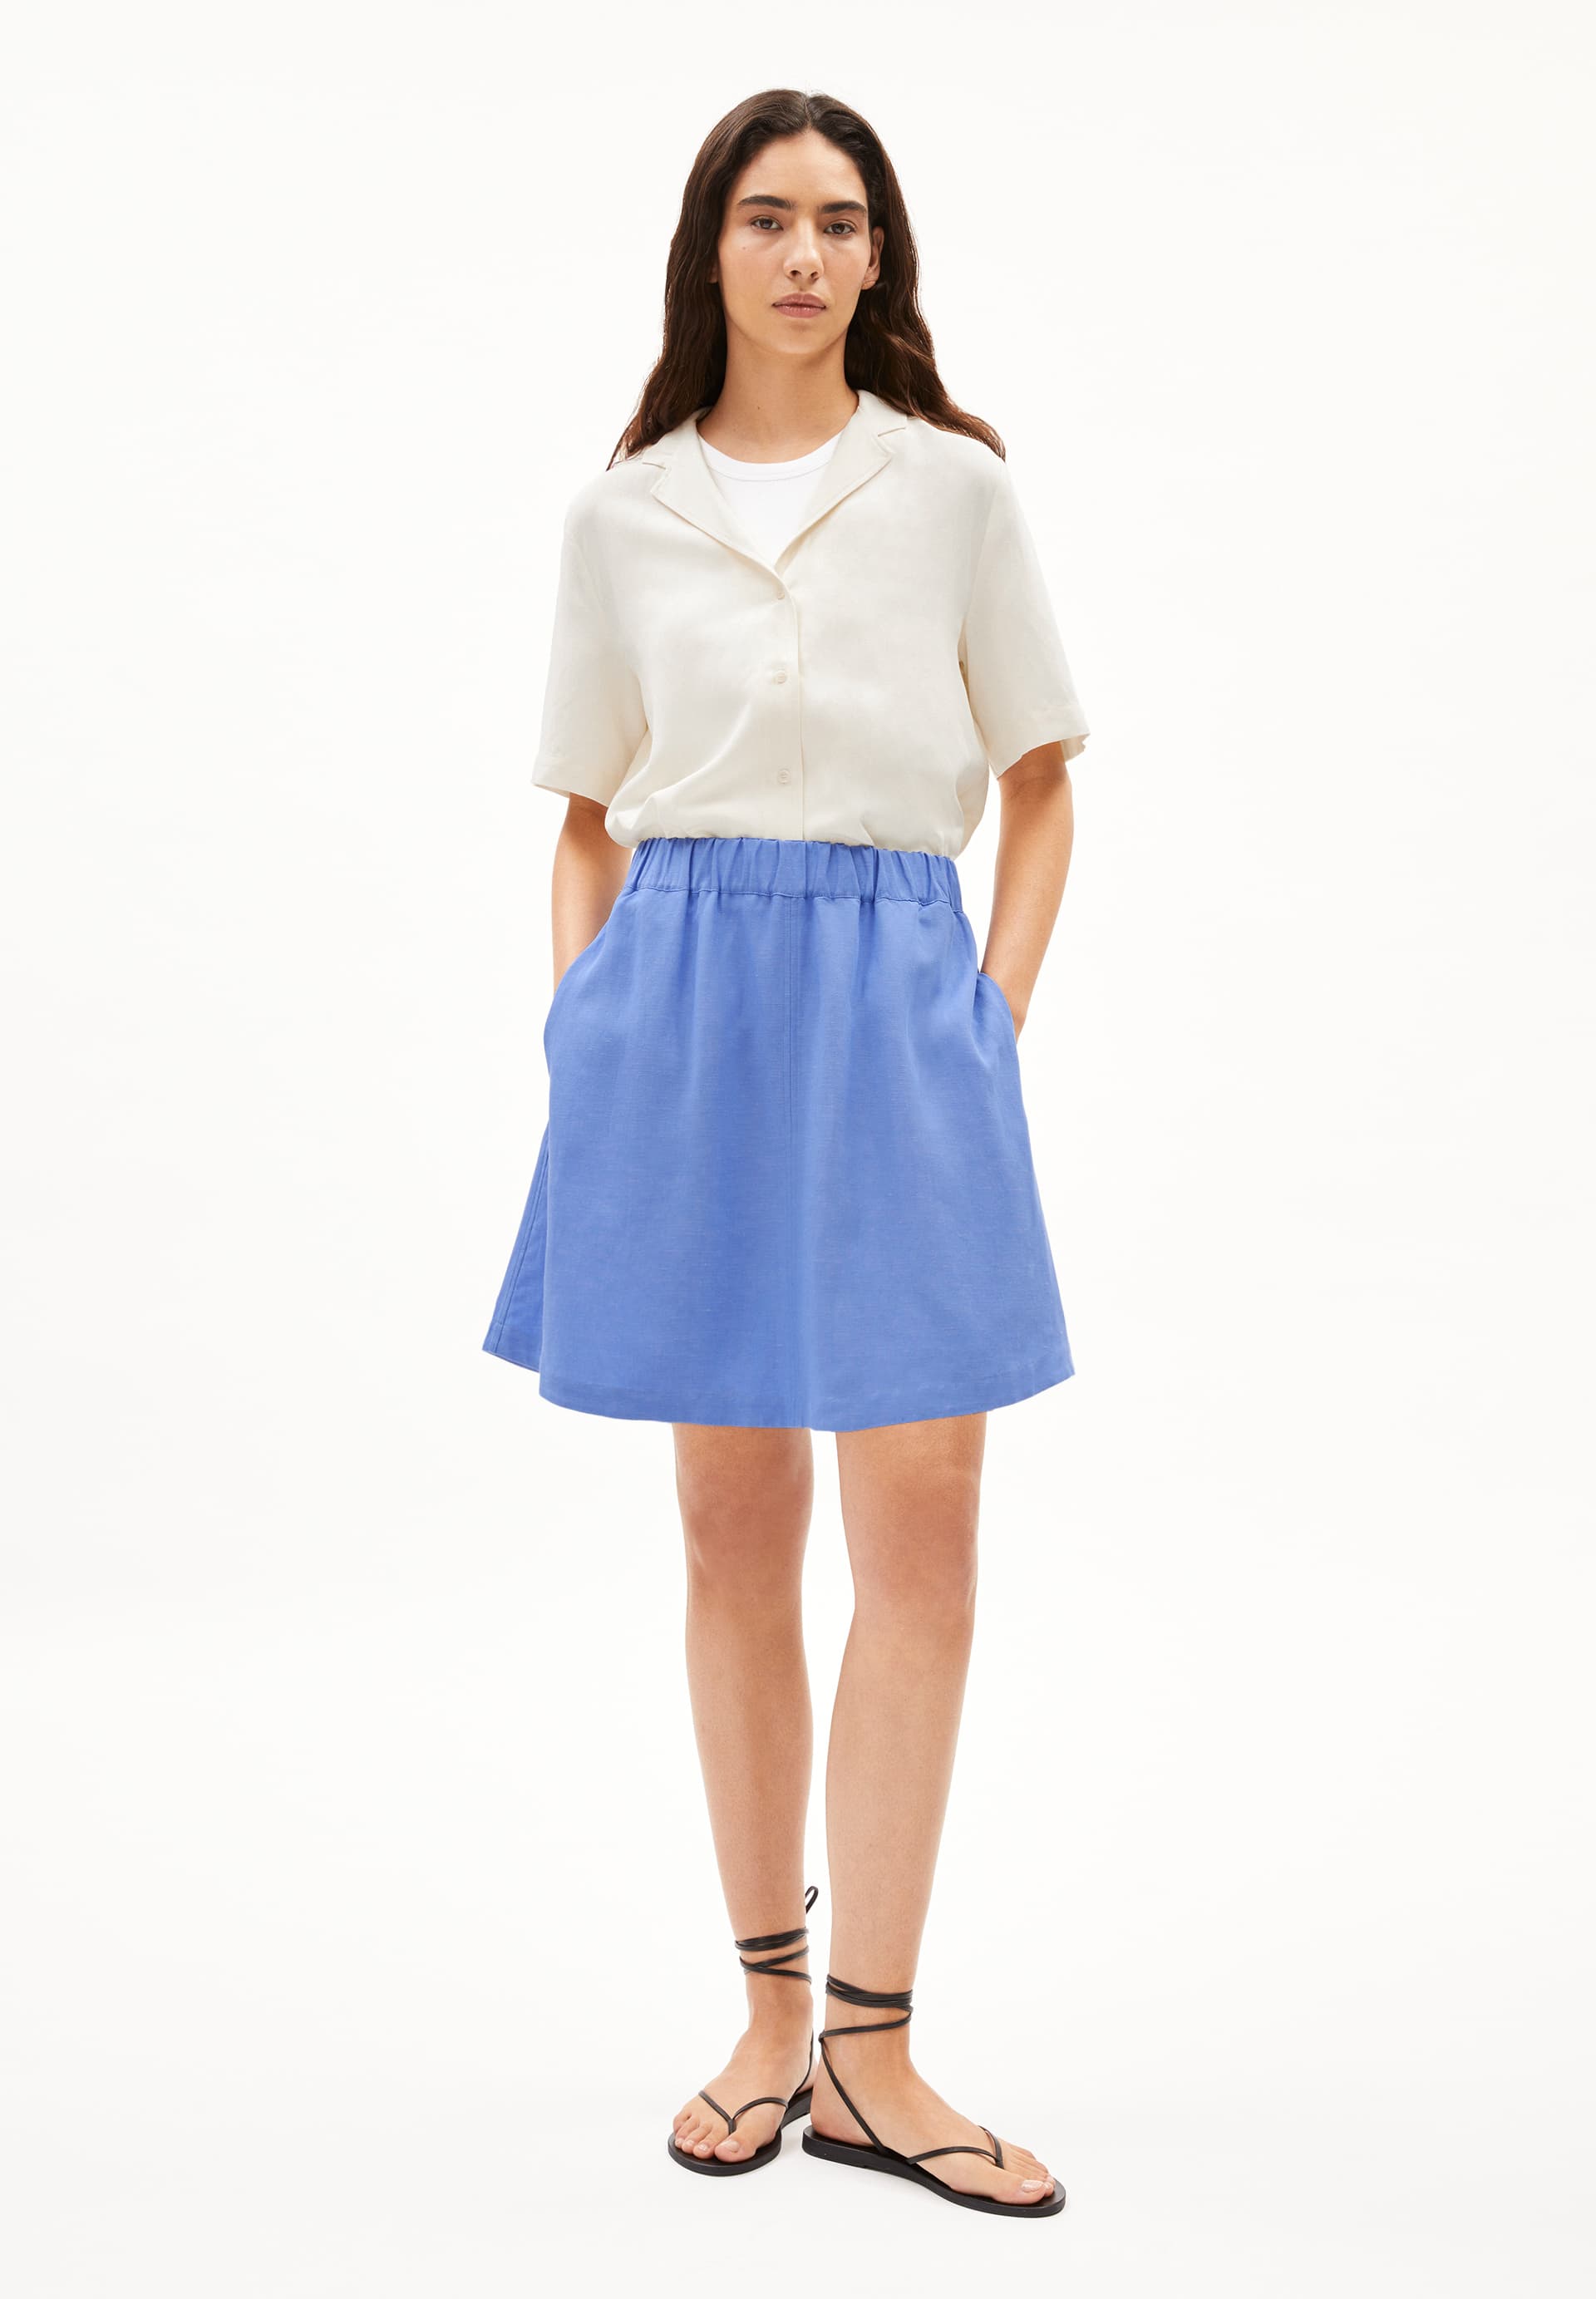 KESIAA LINO Woven Skirt Relaxed Fit made of Linen-Mix